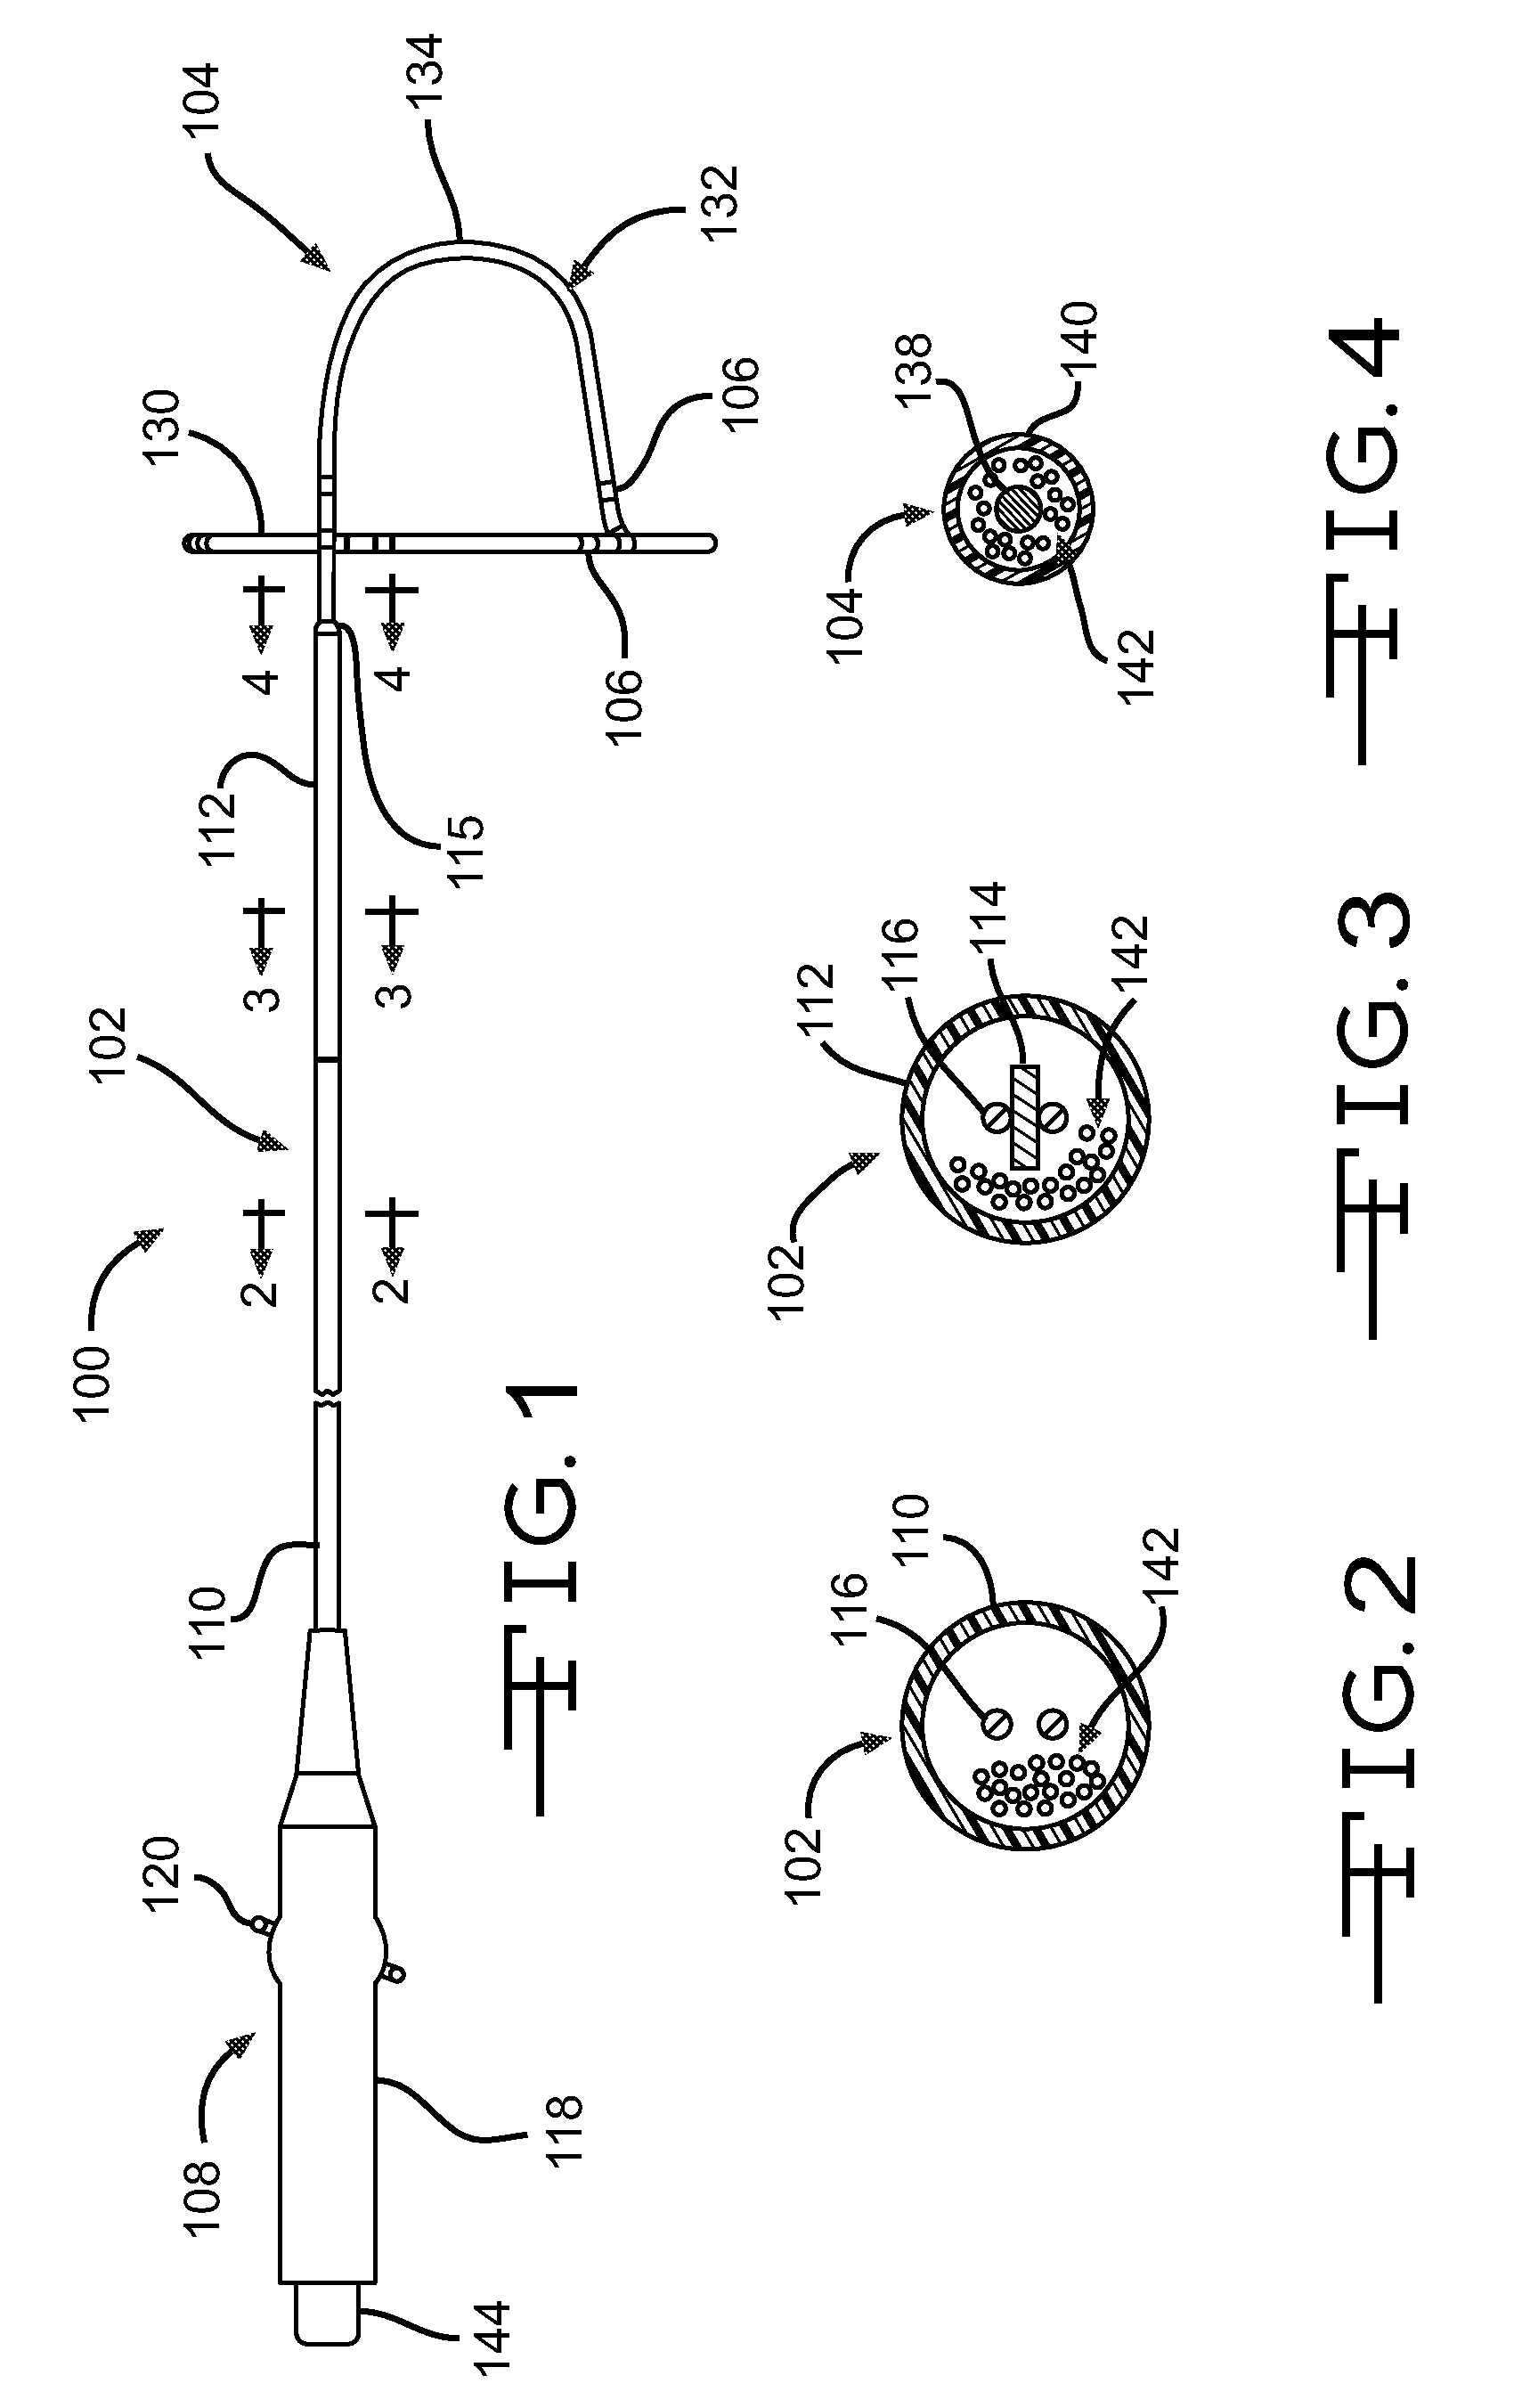 Loop Structures For Supporting Diagnostic and/or Therapeutic Elements in Contact With Tissue